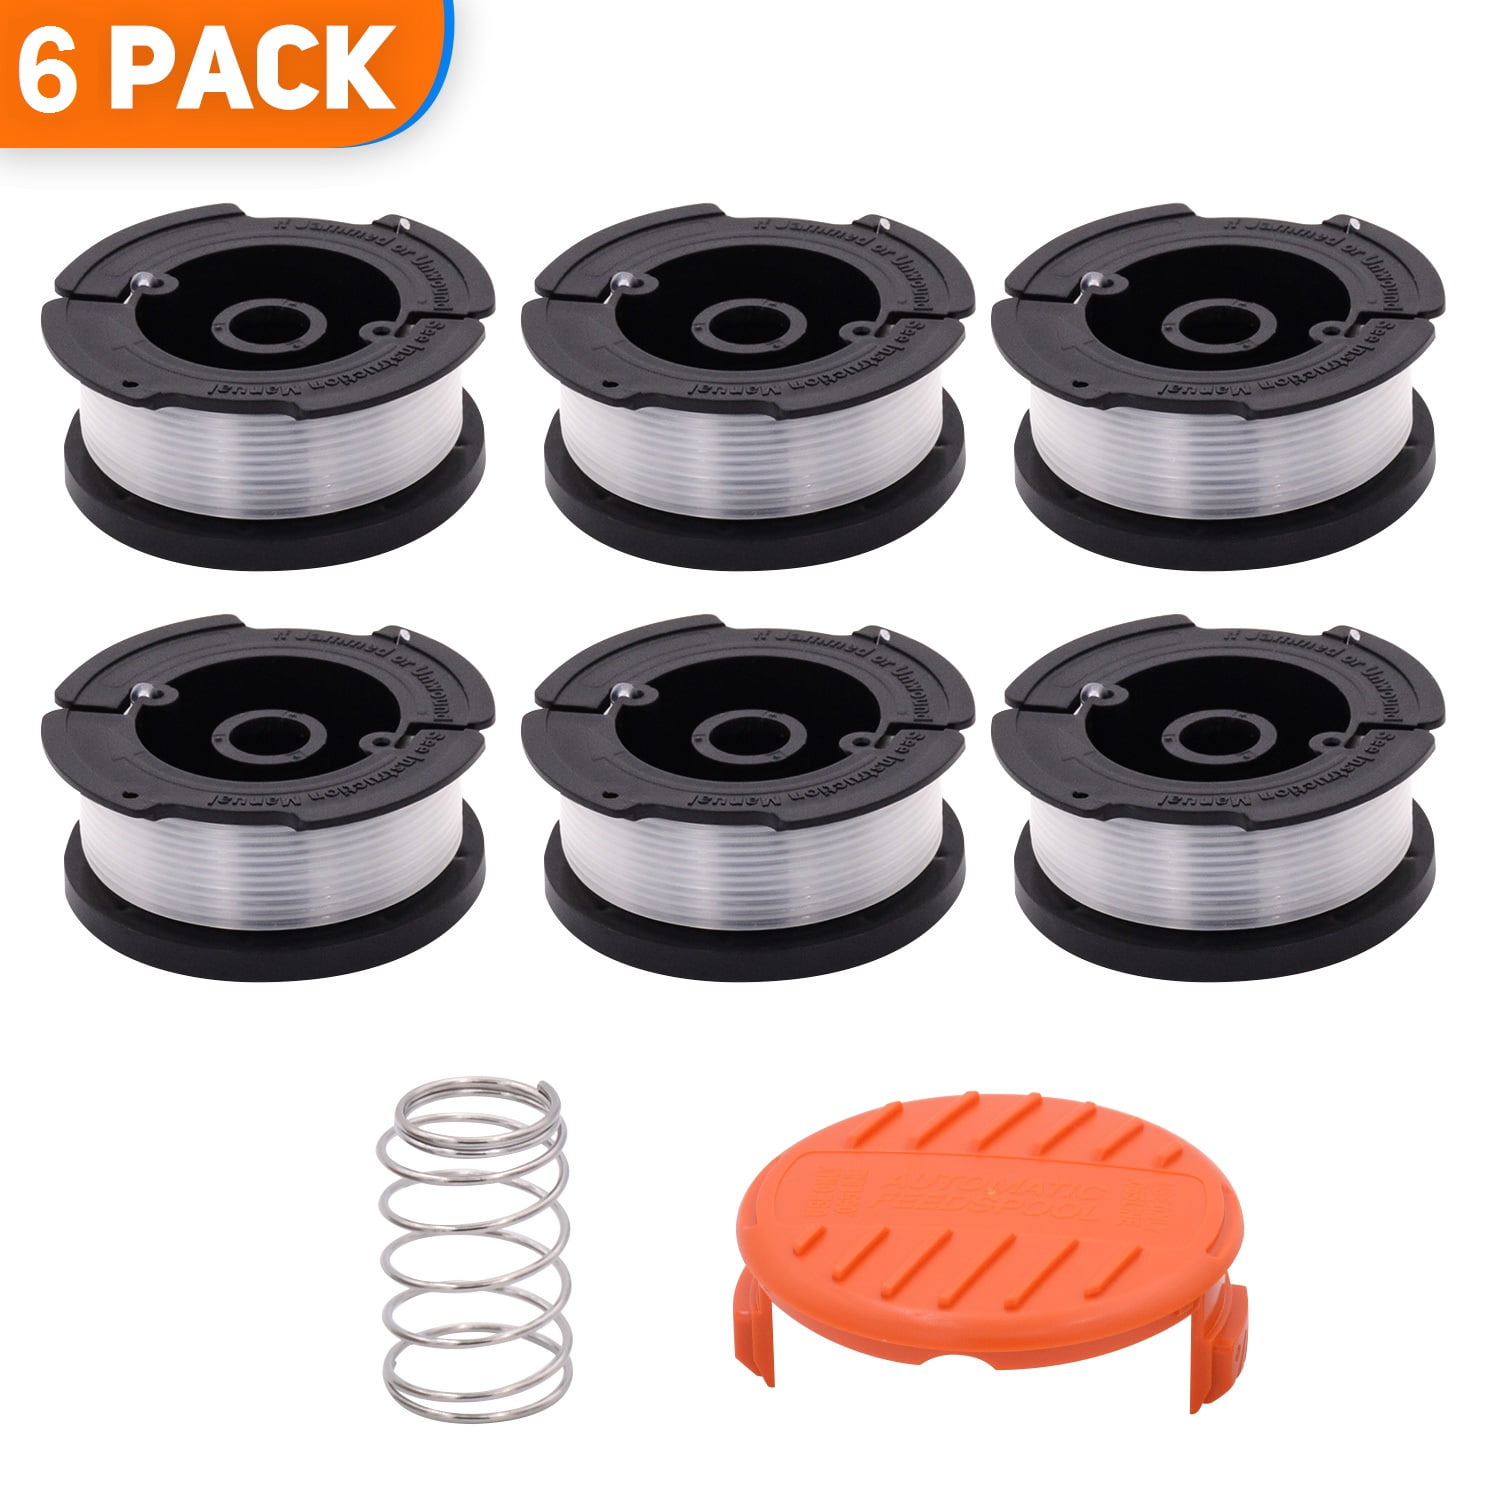 BLACK+DECKER 0.065 in. x 30 ft. Replacement Single Line Automatic Feed  Spools AFS for Electric String Grass Trimmer/Edger (3-Pack) AF-100-3ZP 1 -  The Home Depot